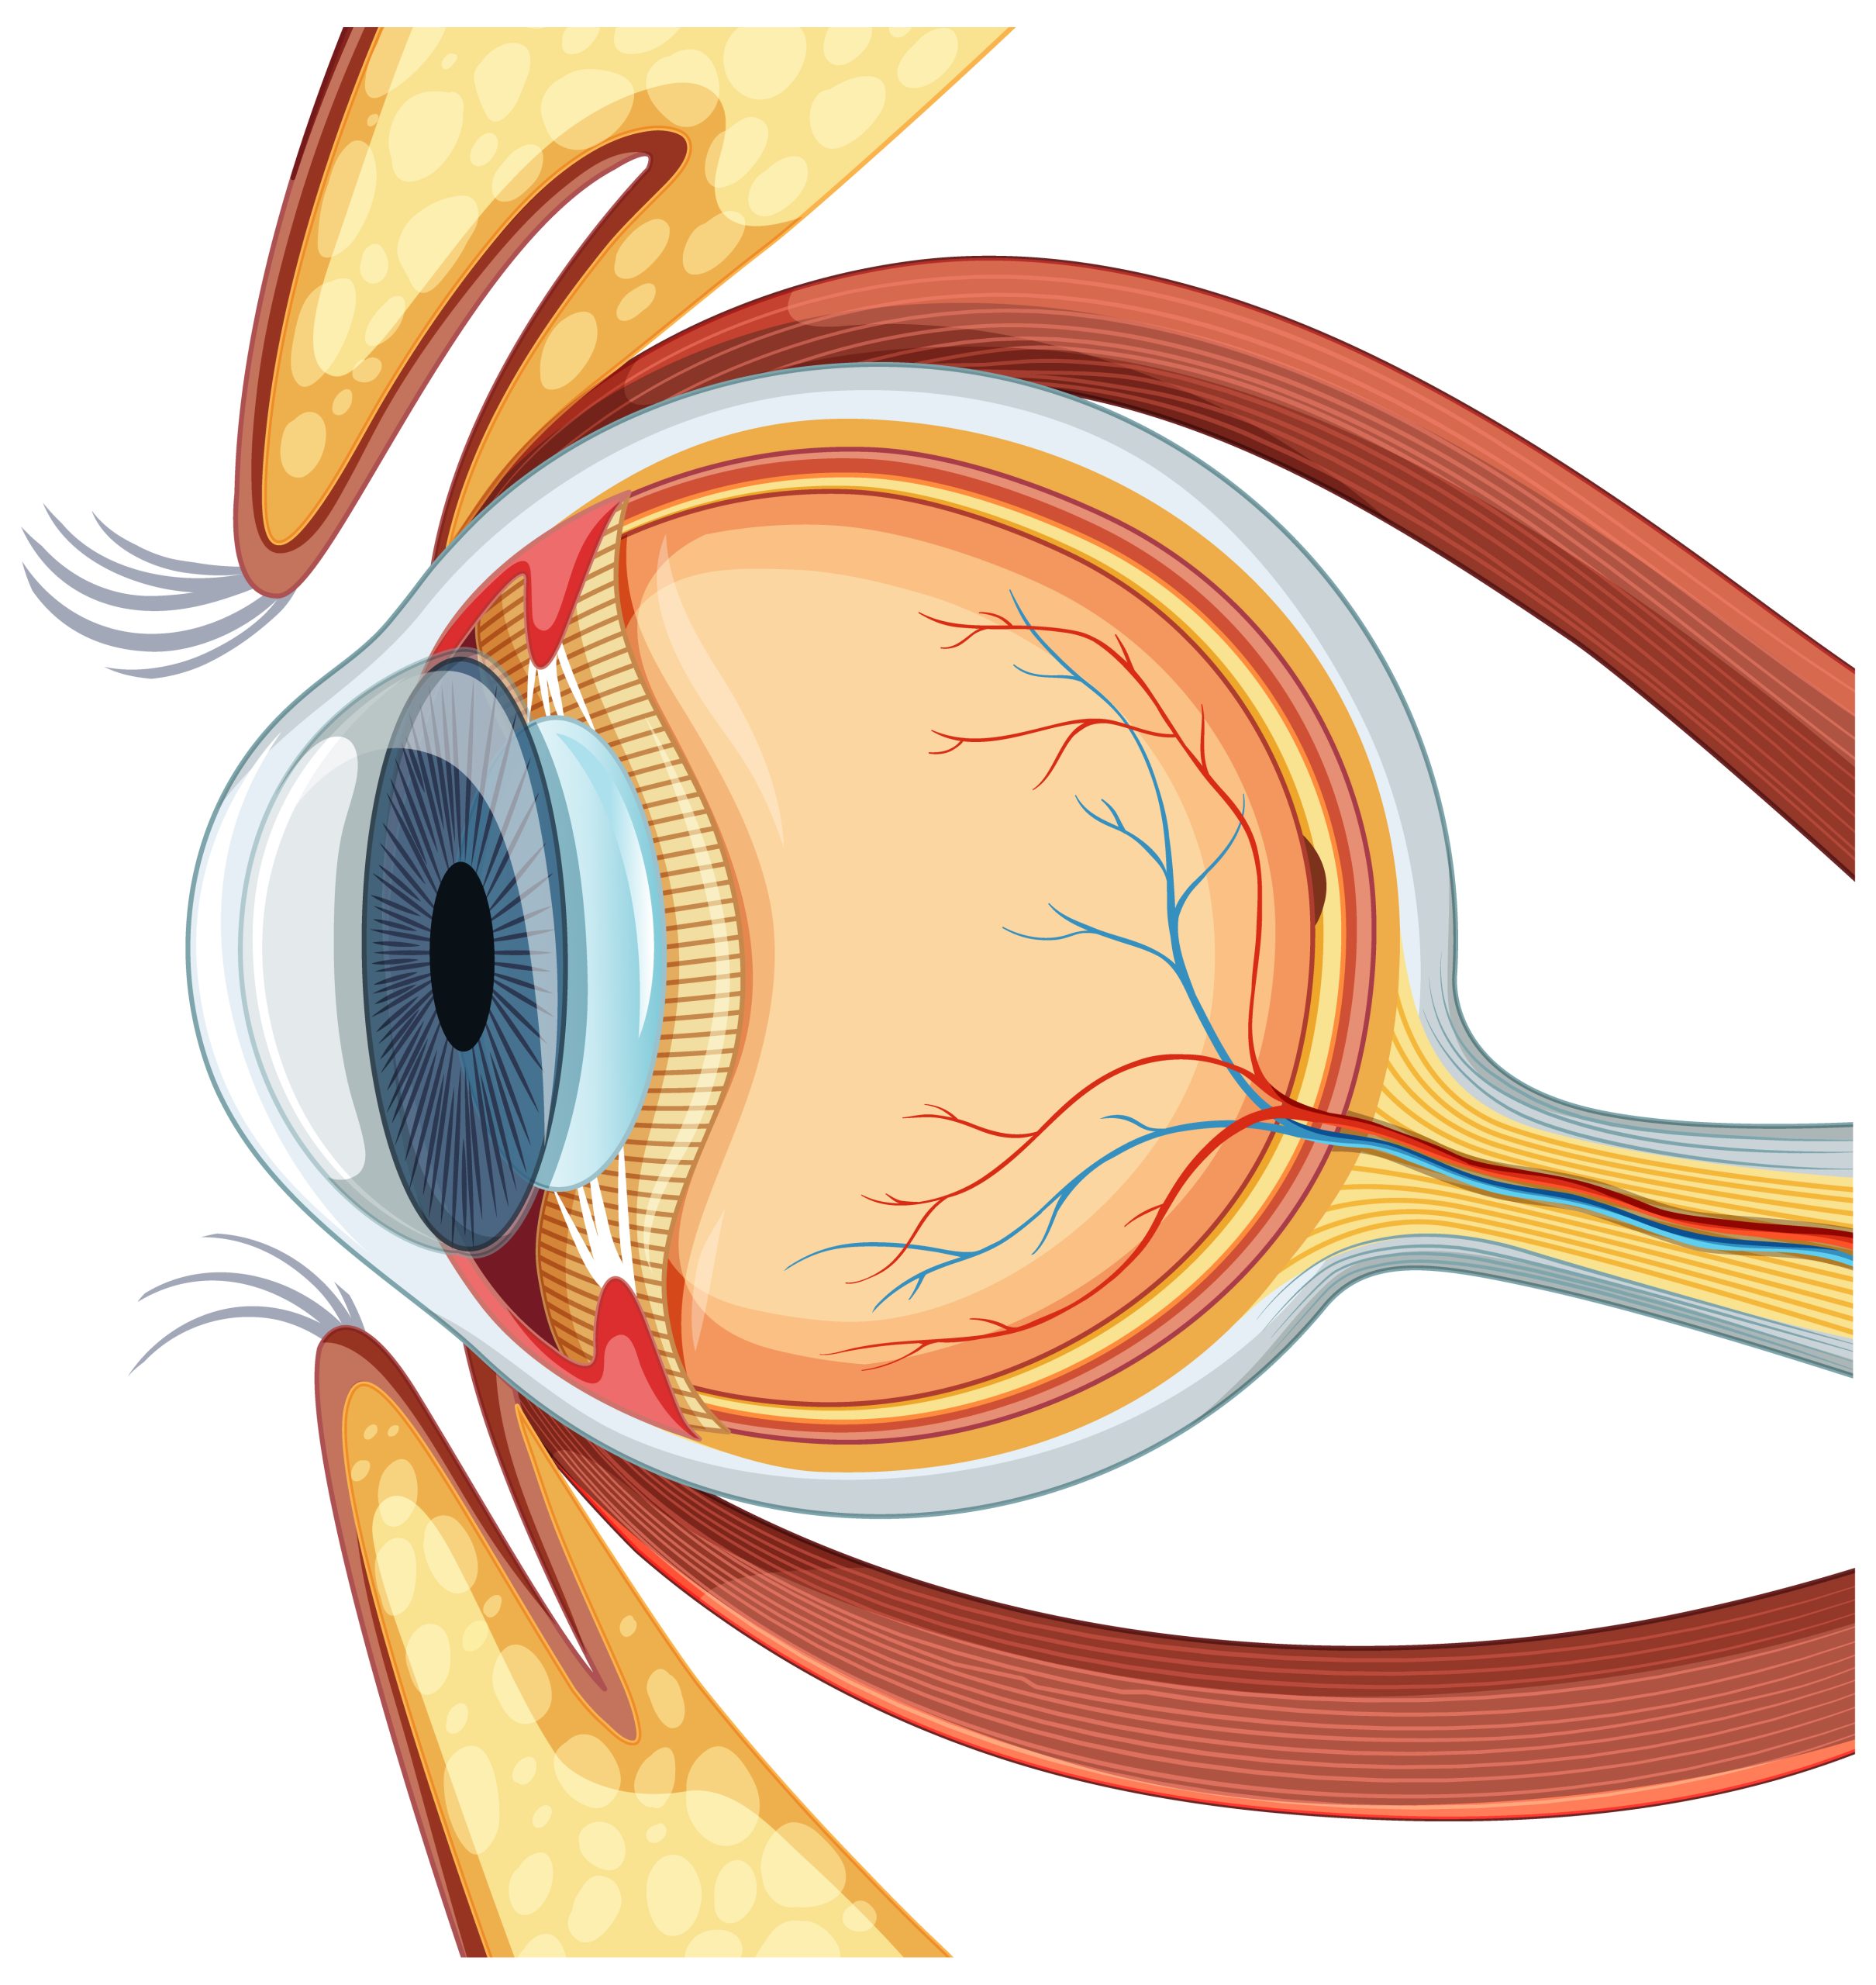 A Comprehensive Guide to External Ocular Muscles